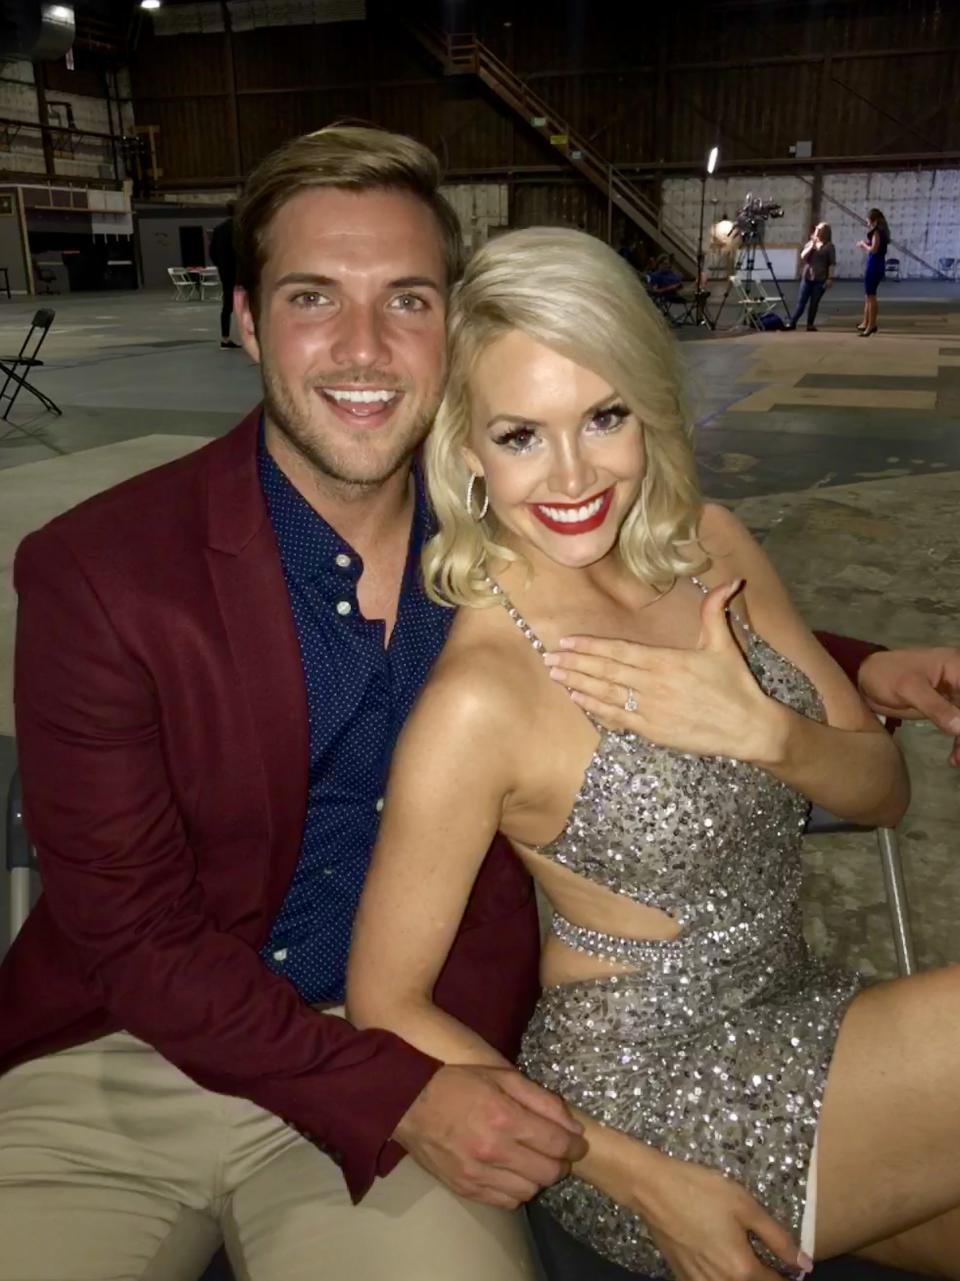 Jordan Kimball and Jenna Cooper talk about what you didn't see before they got engaged on 'Bachelor in Paradise' and what comes next now that the show is over.